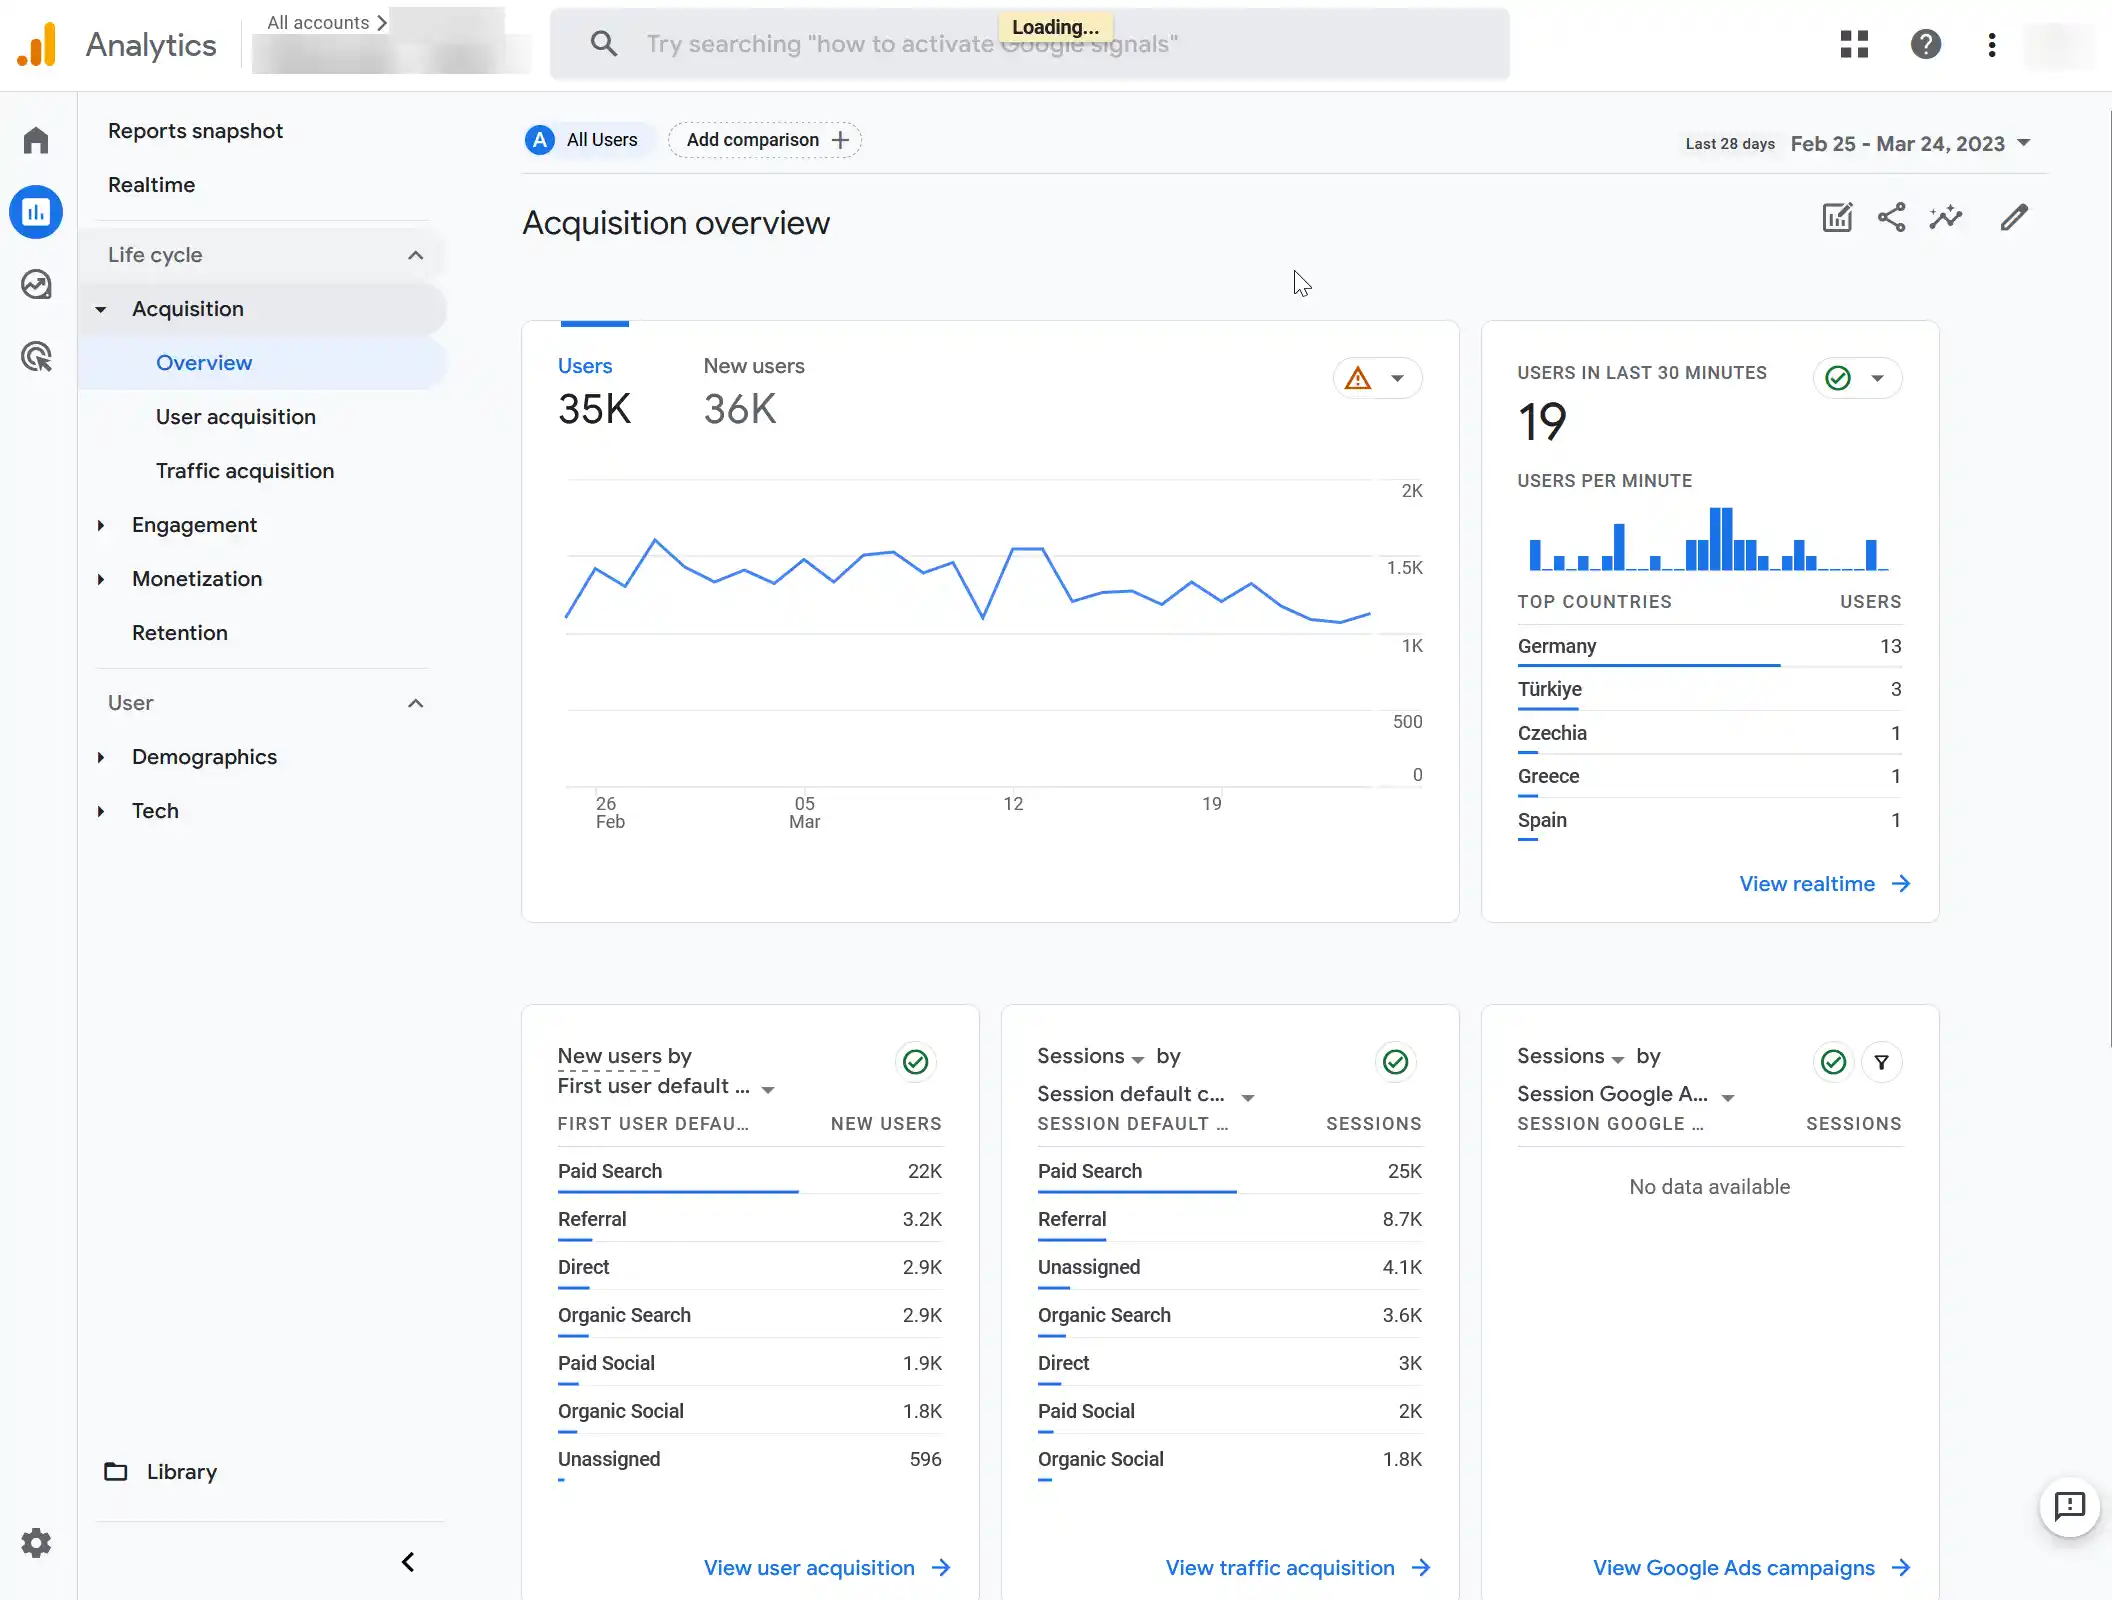 Google Analytics 4 Dashboard showing the Acquisition Insights